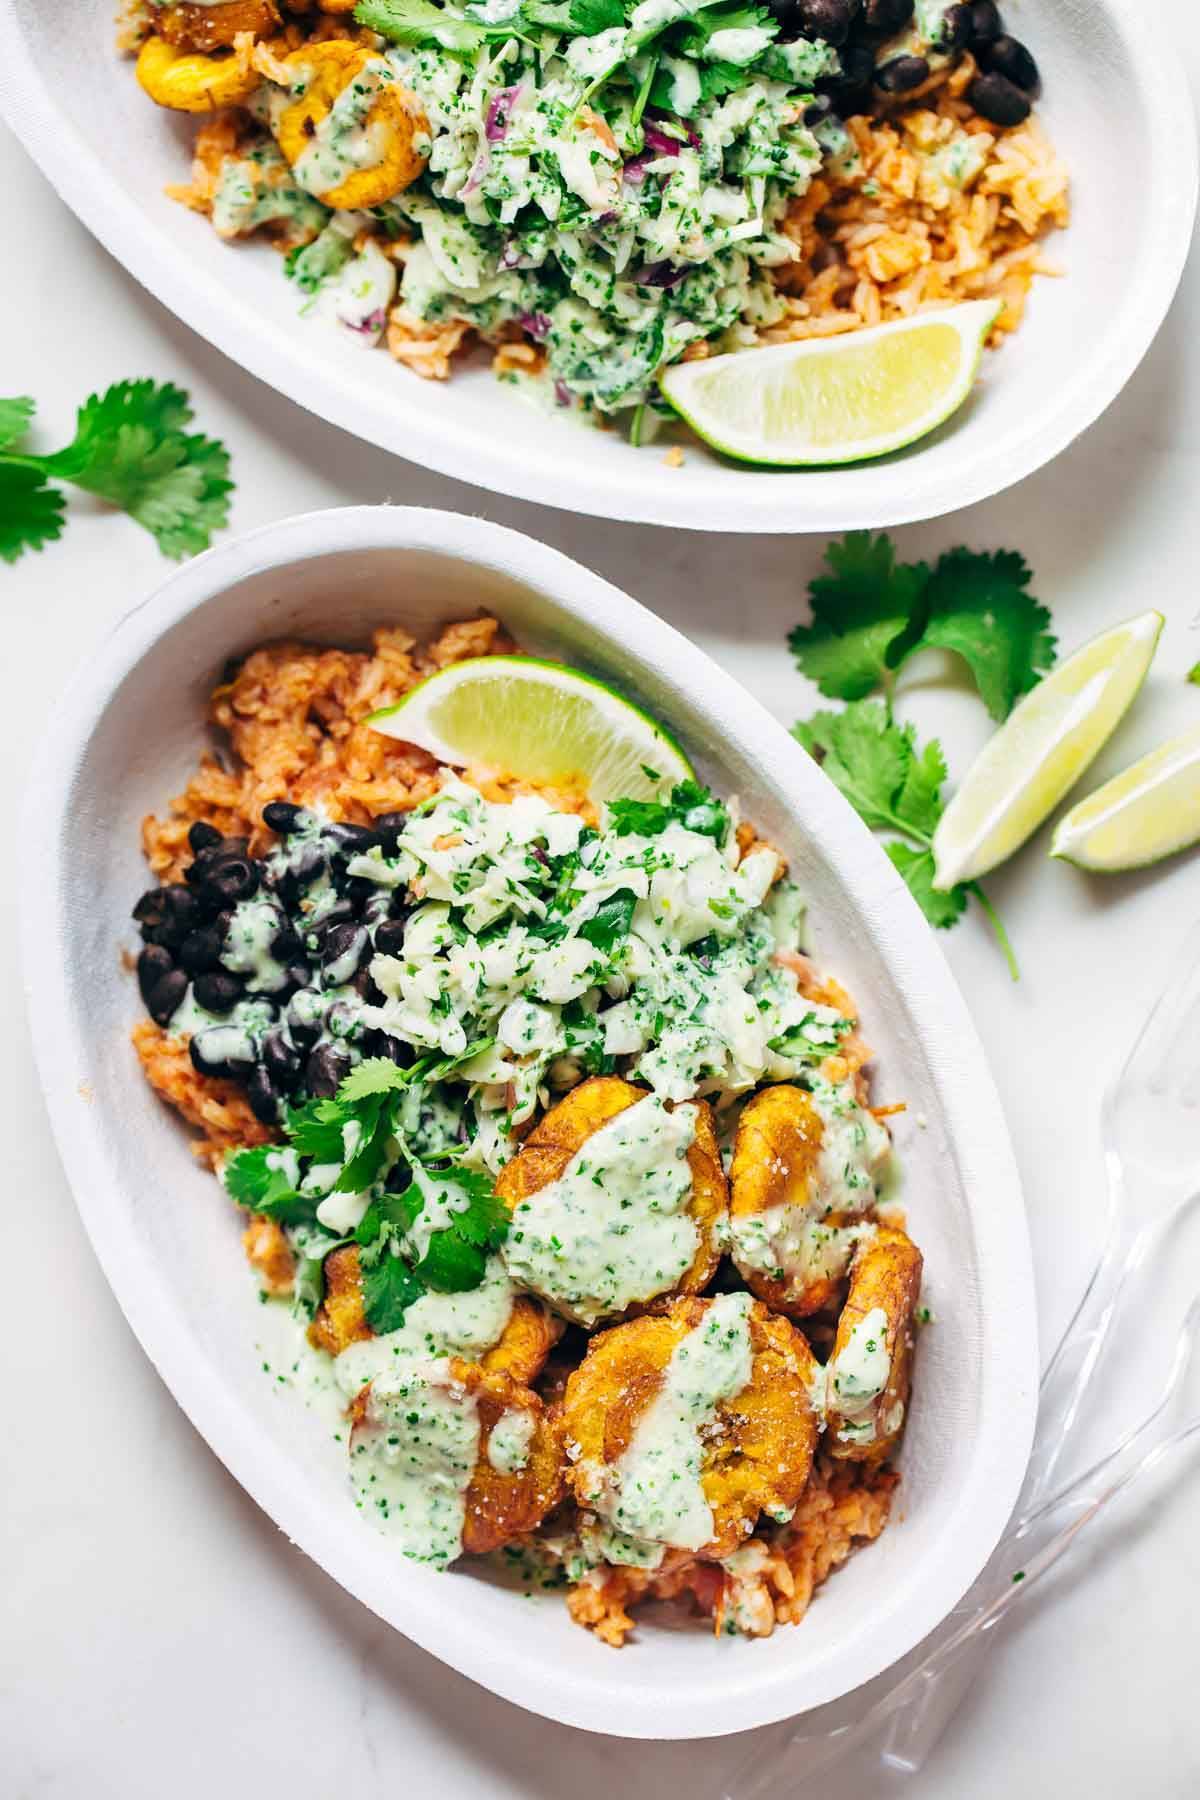 Spicy Brazilian Burrito Bowls recipe featuring seasoned rice and beans, garlic cilantro lime slaw, and crispy fried plantains. So good // almost vegan. | pinchofyum.com